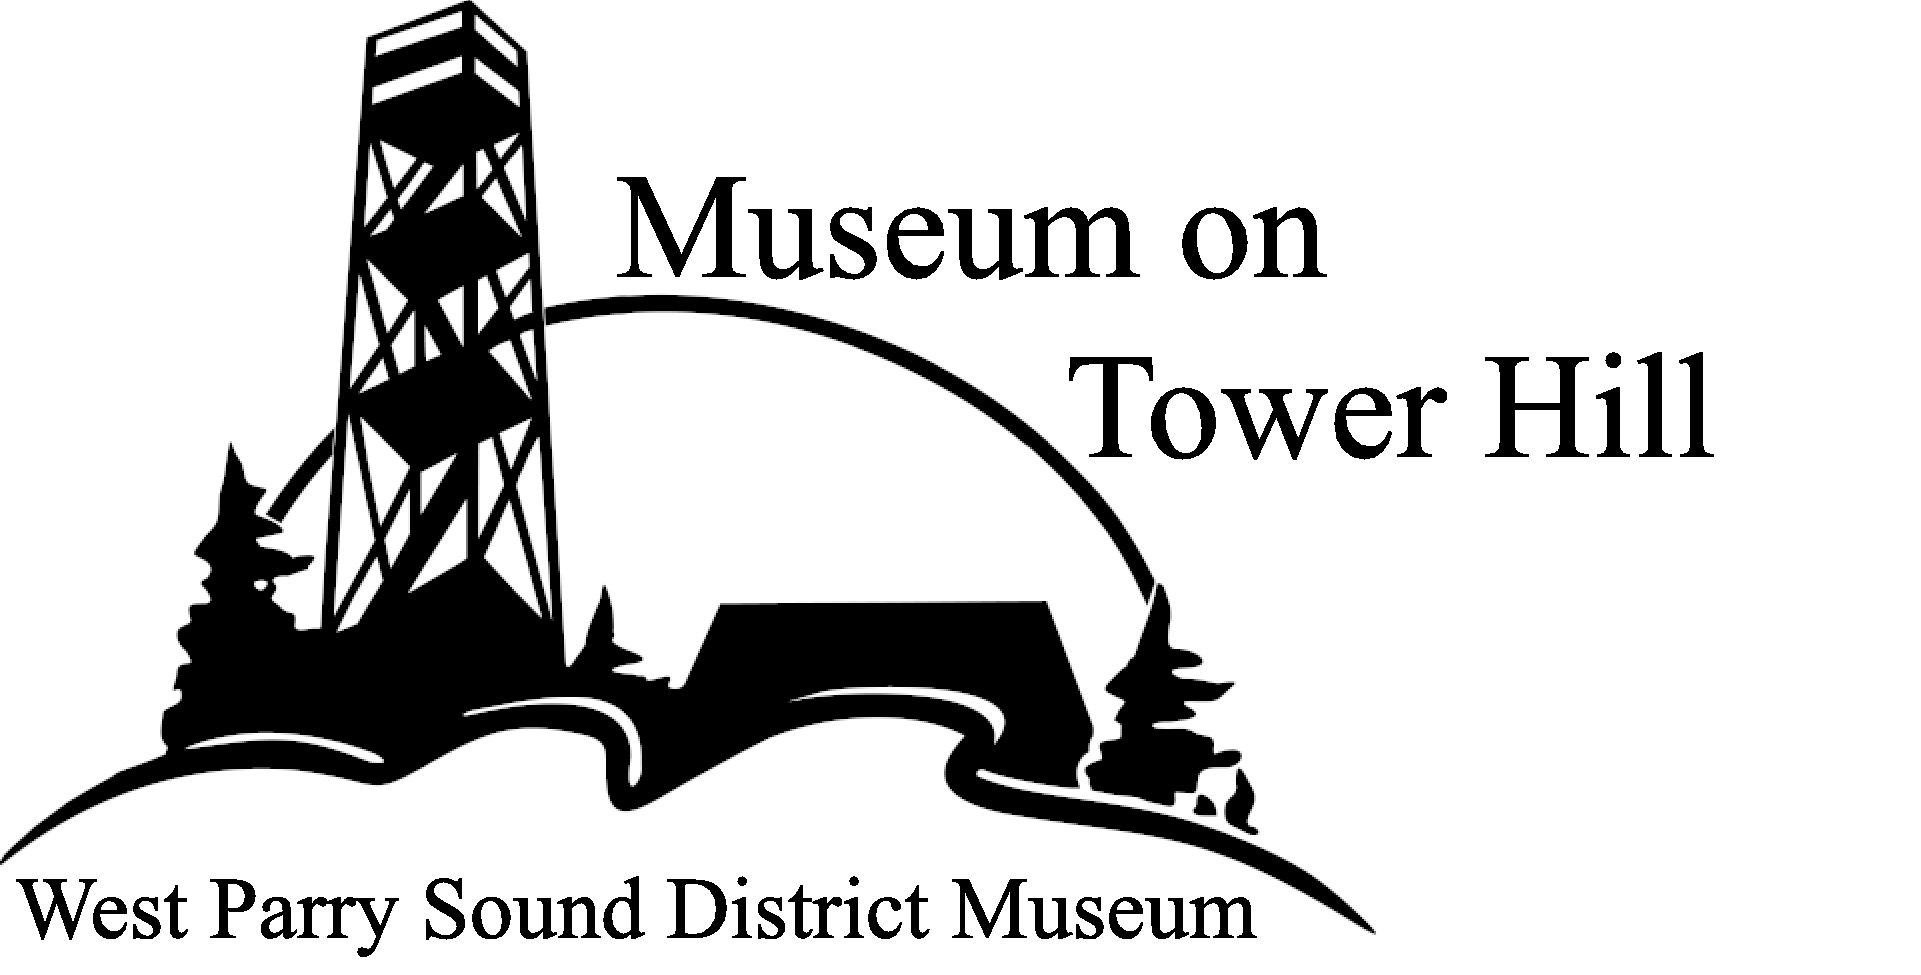 museum on tower hill west parry sound district museum logo